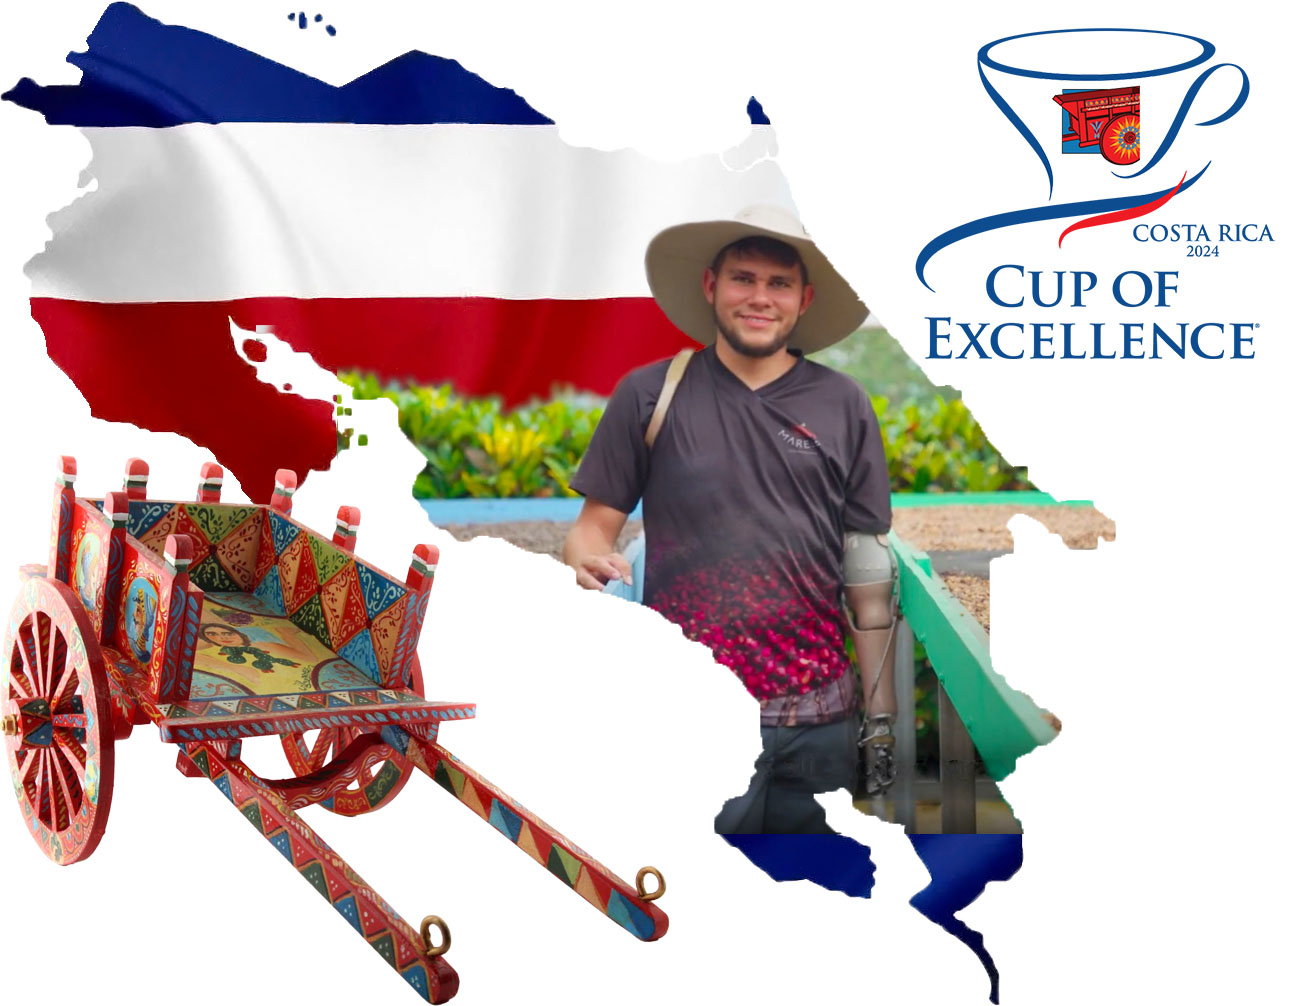 Costa Rica Cup of Excellence 2024